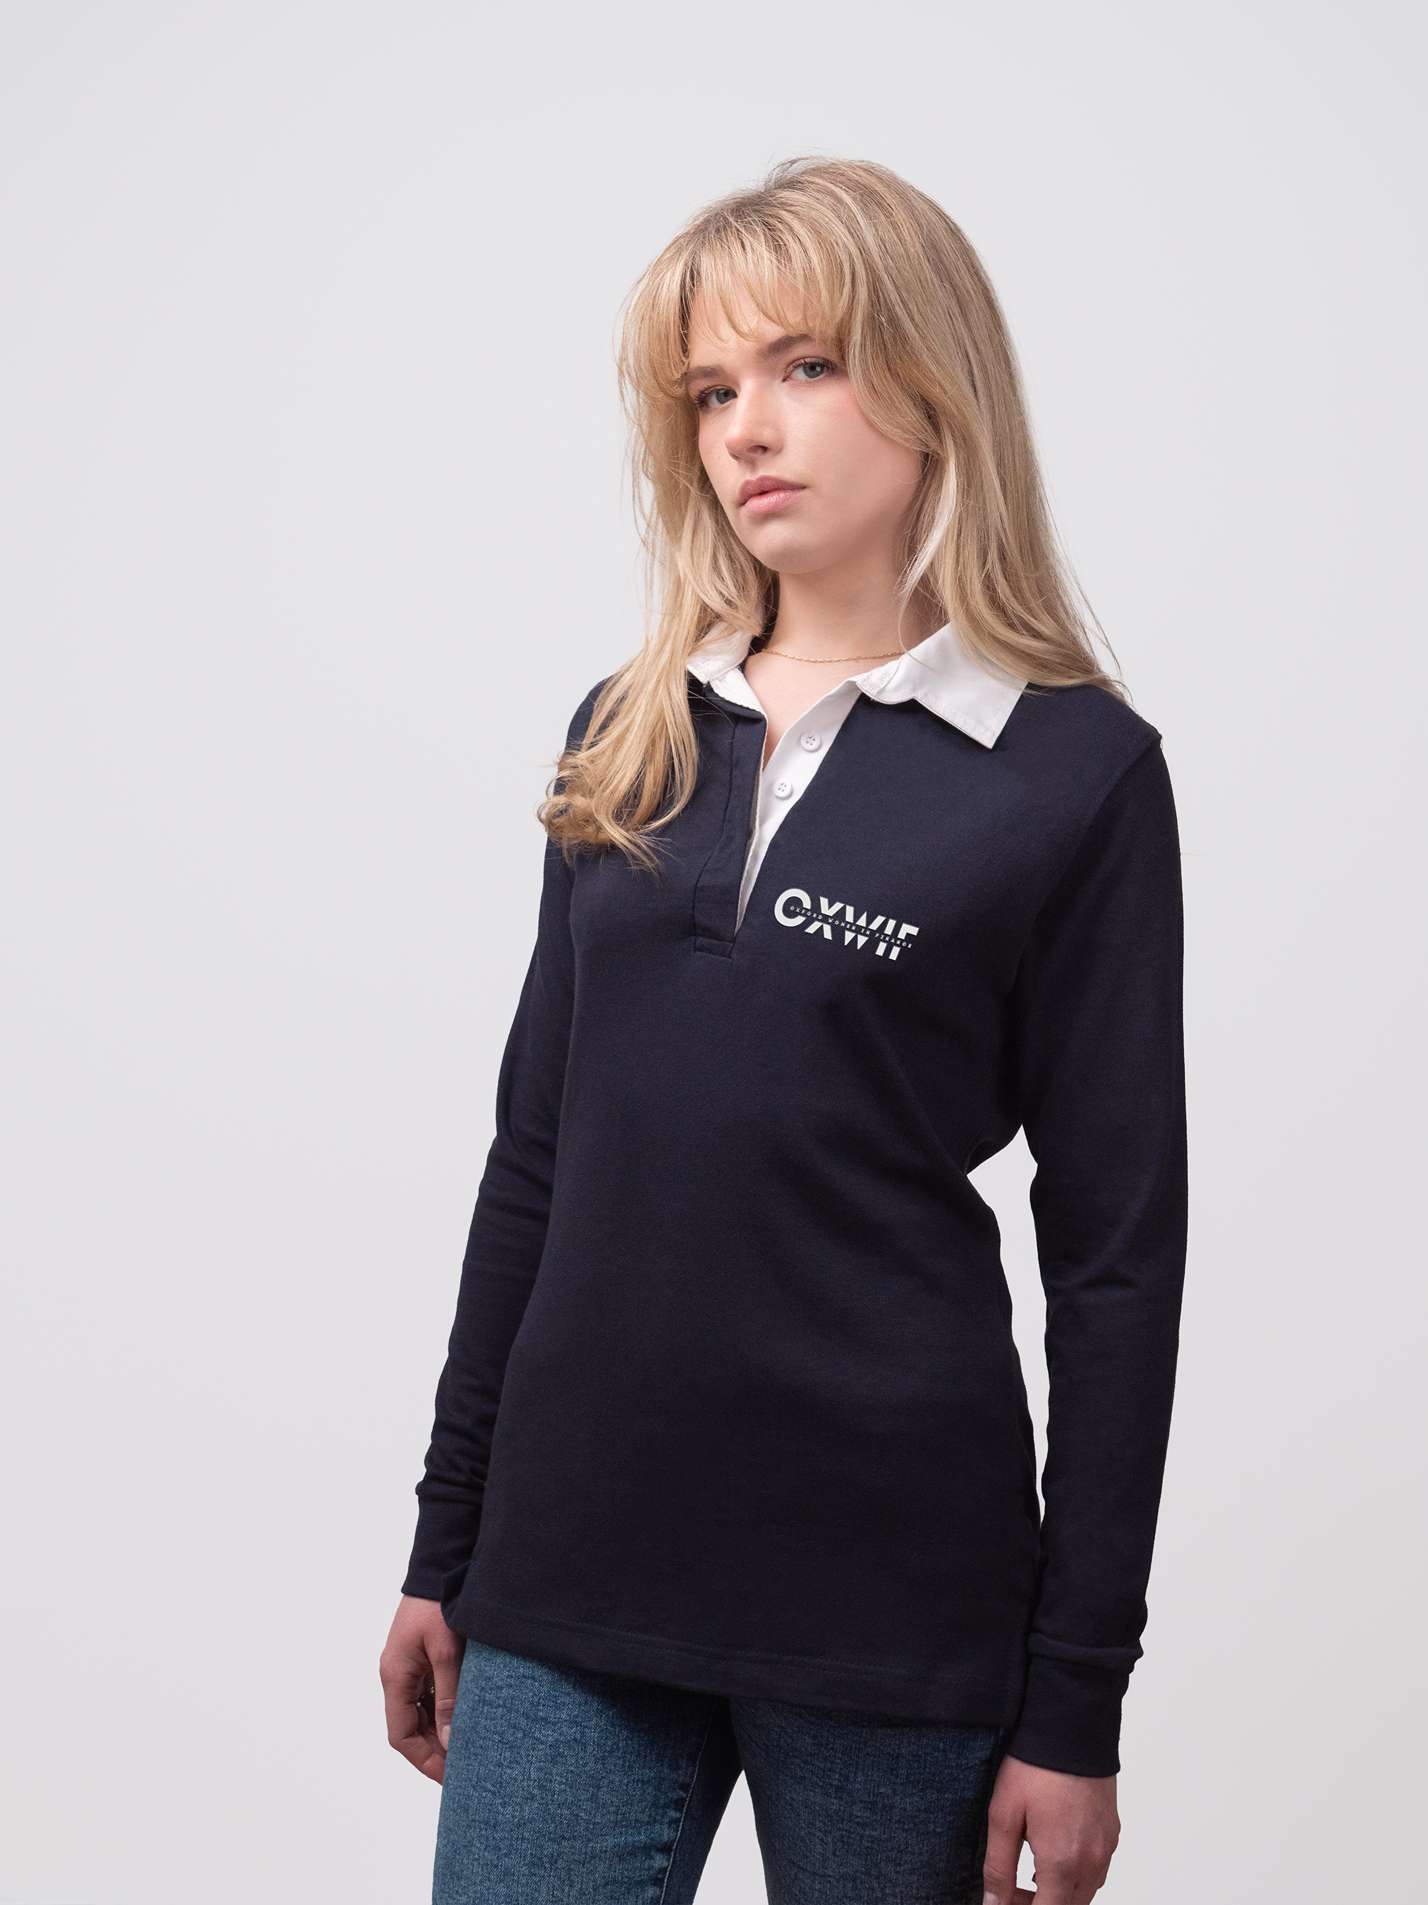 Oxford Women in Finance Classic Ladies Rugby Shirt